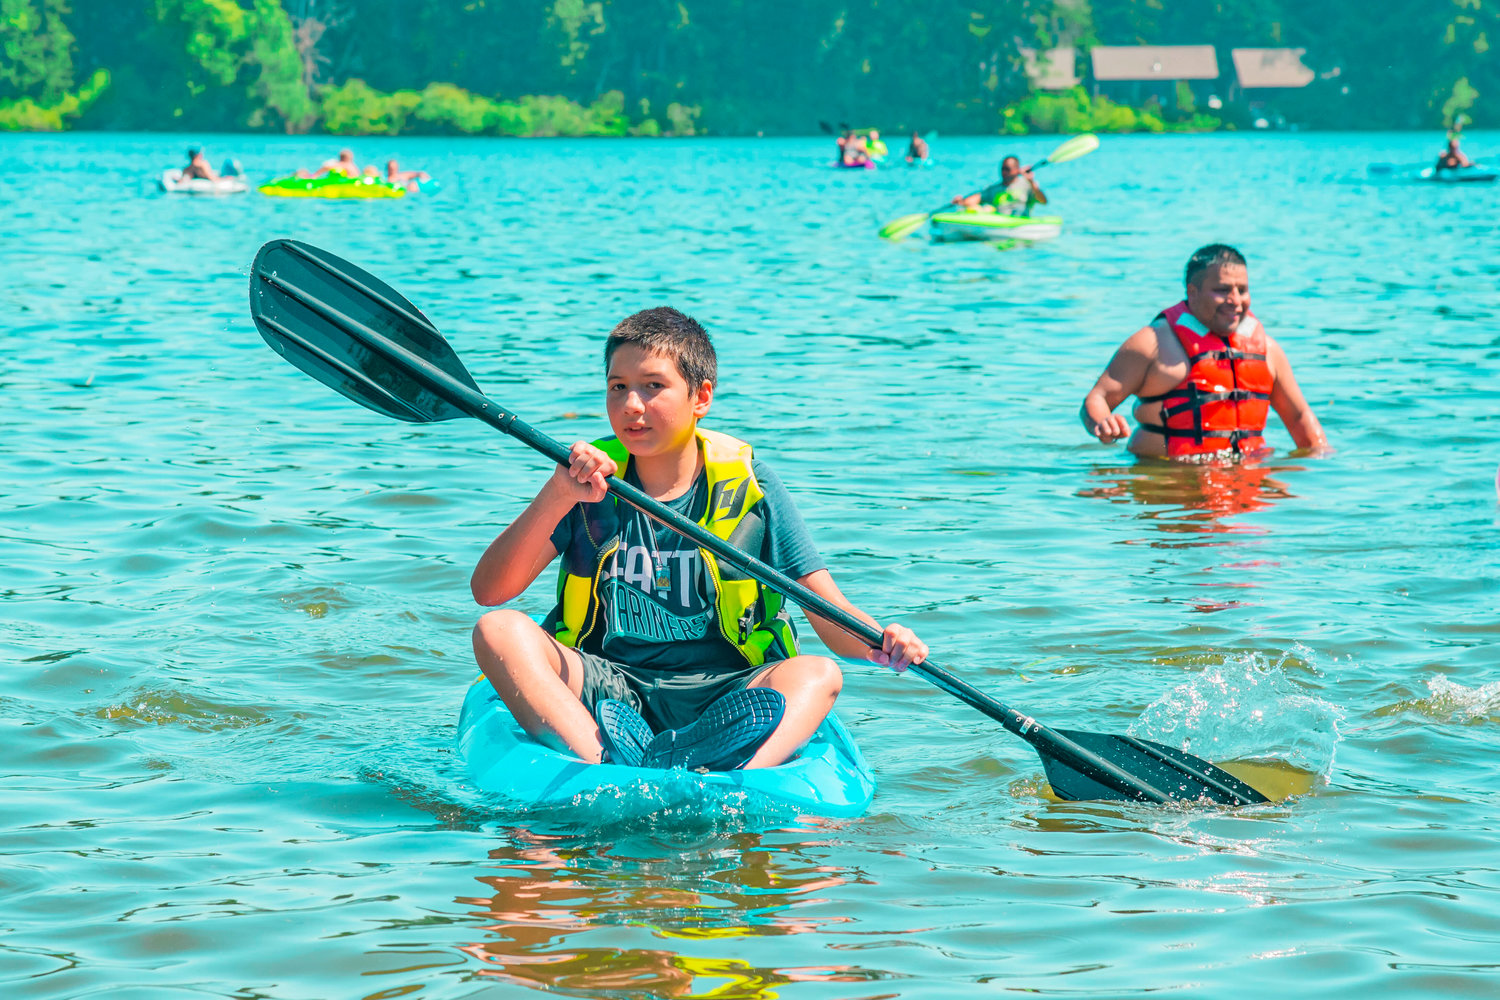 Life jackets and boat rentals were also available on Sunday at Deep Lake.